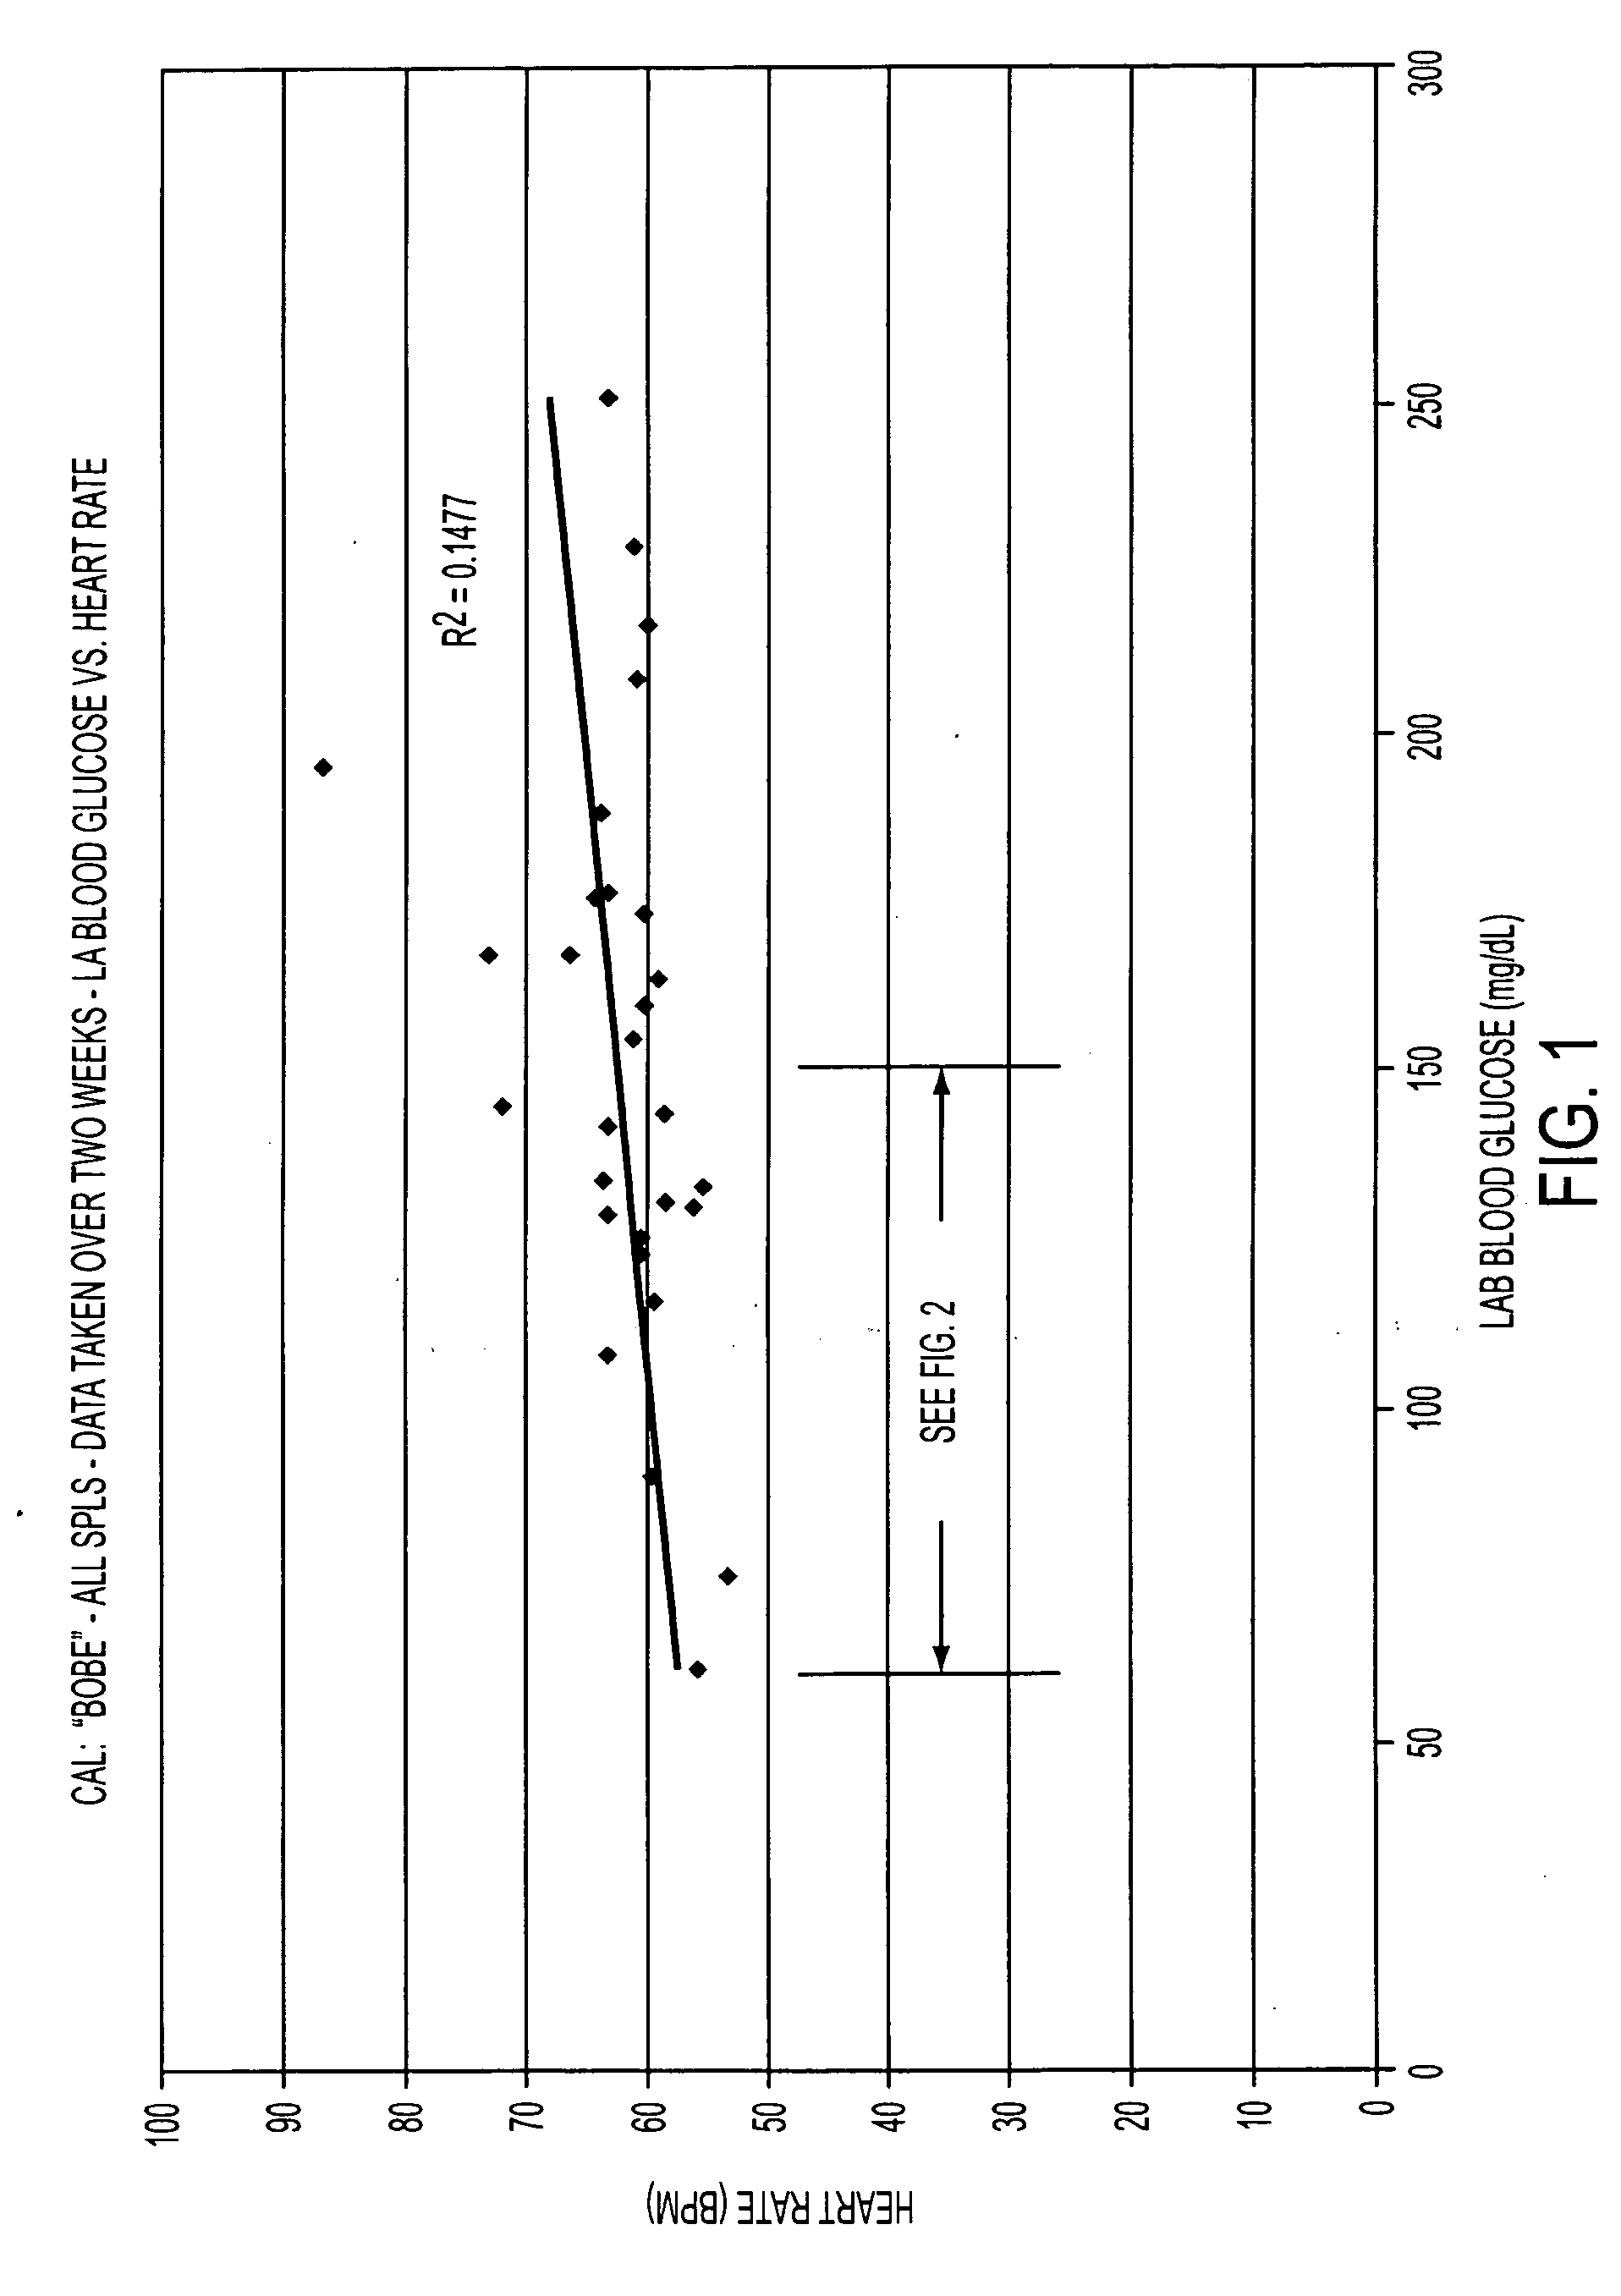 Method and apparatus for low blood glucose level detection